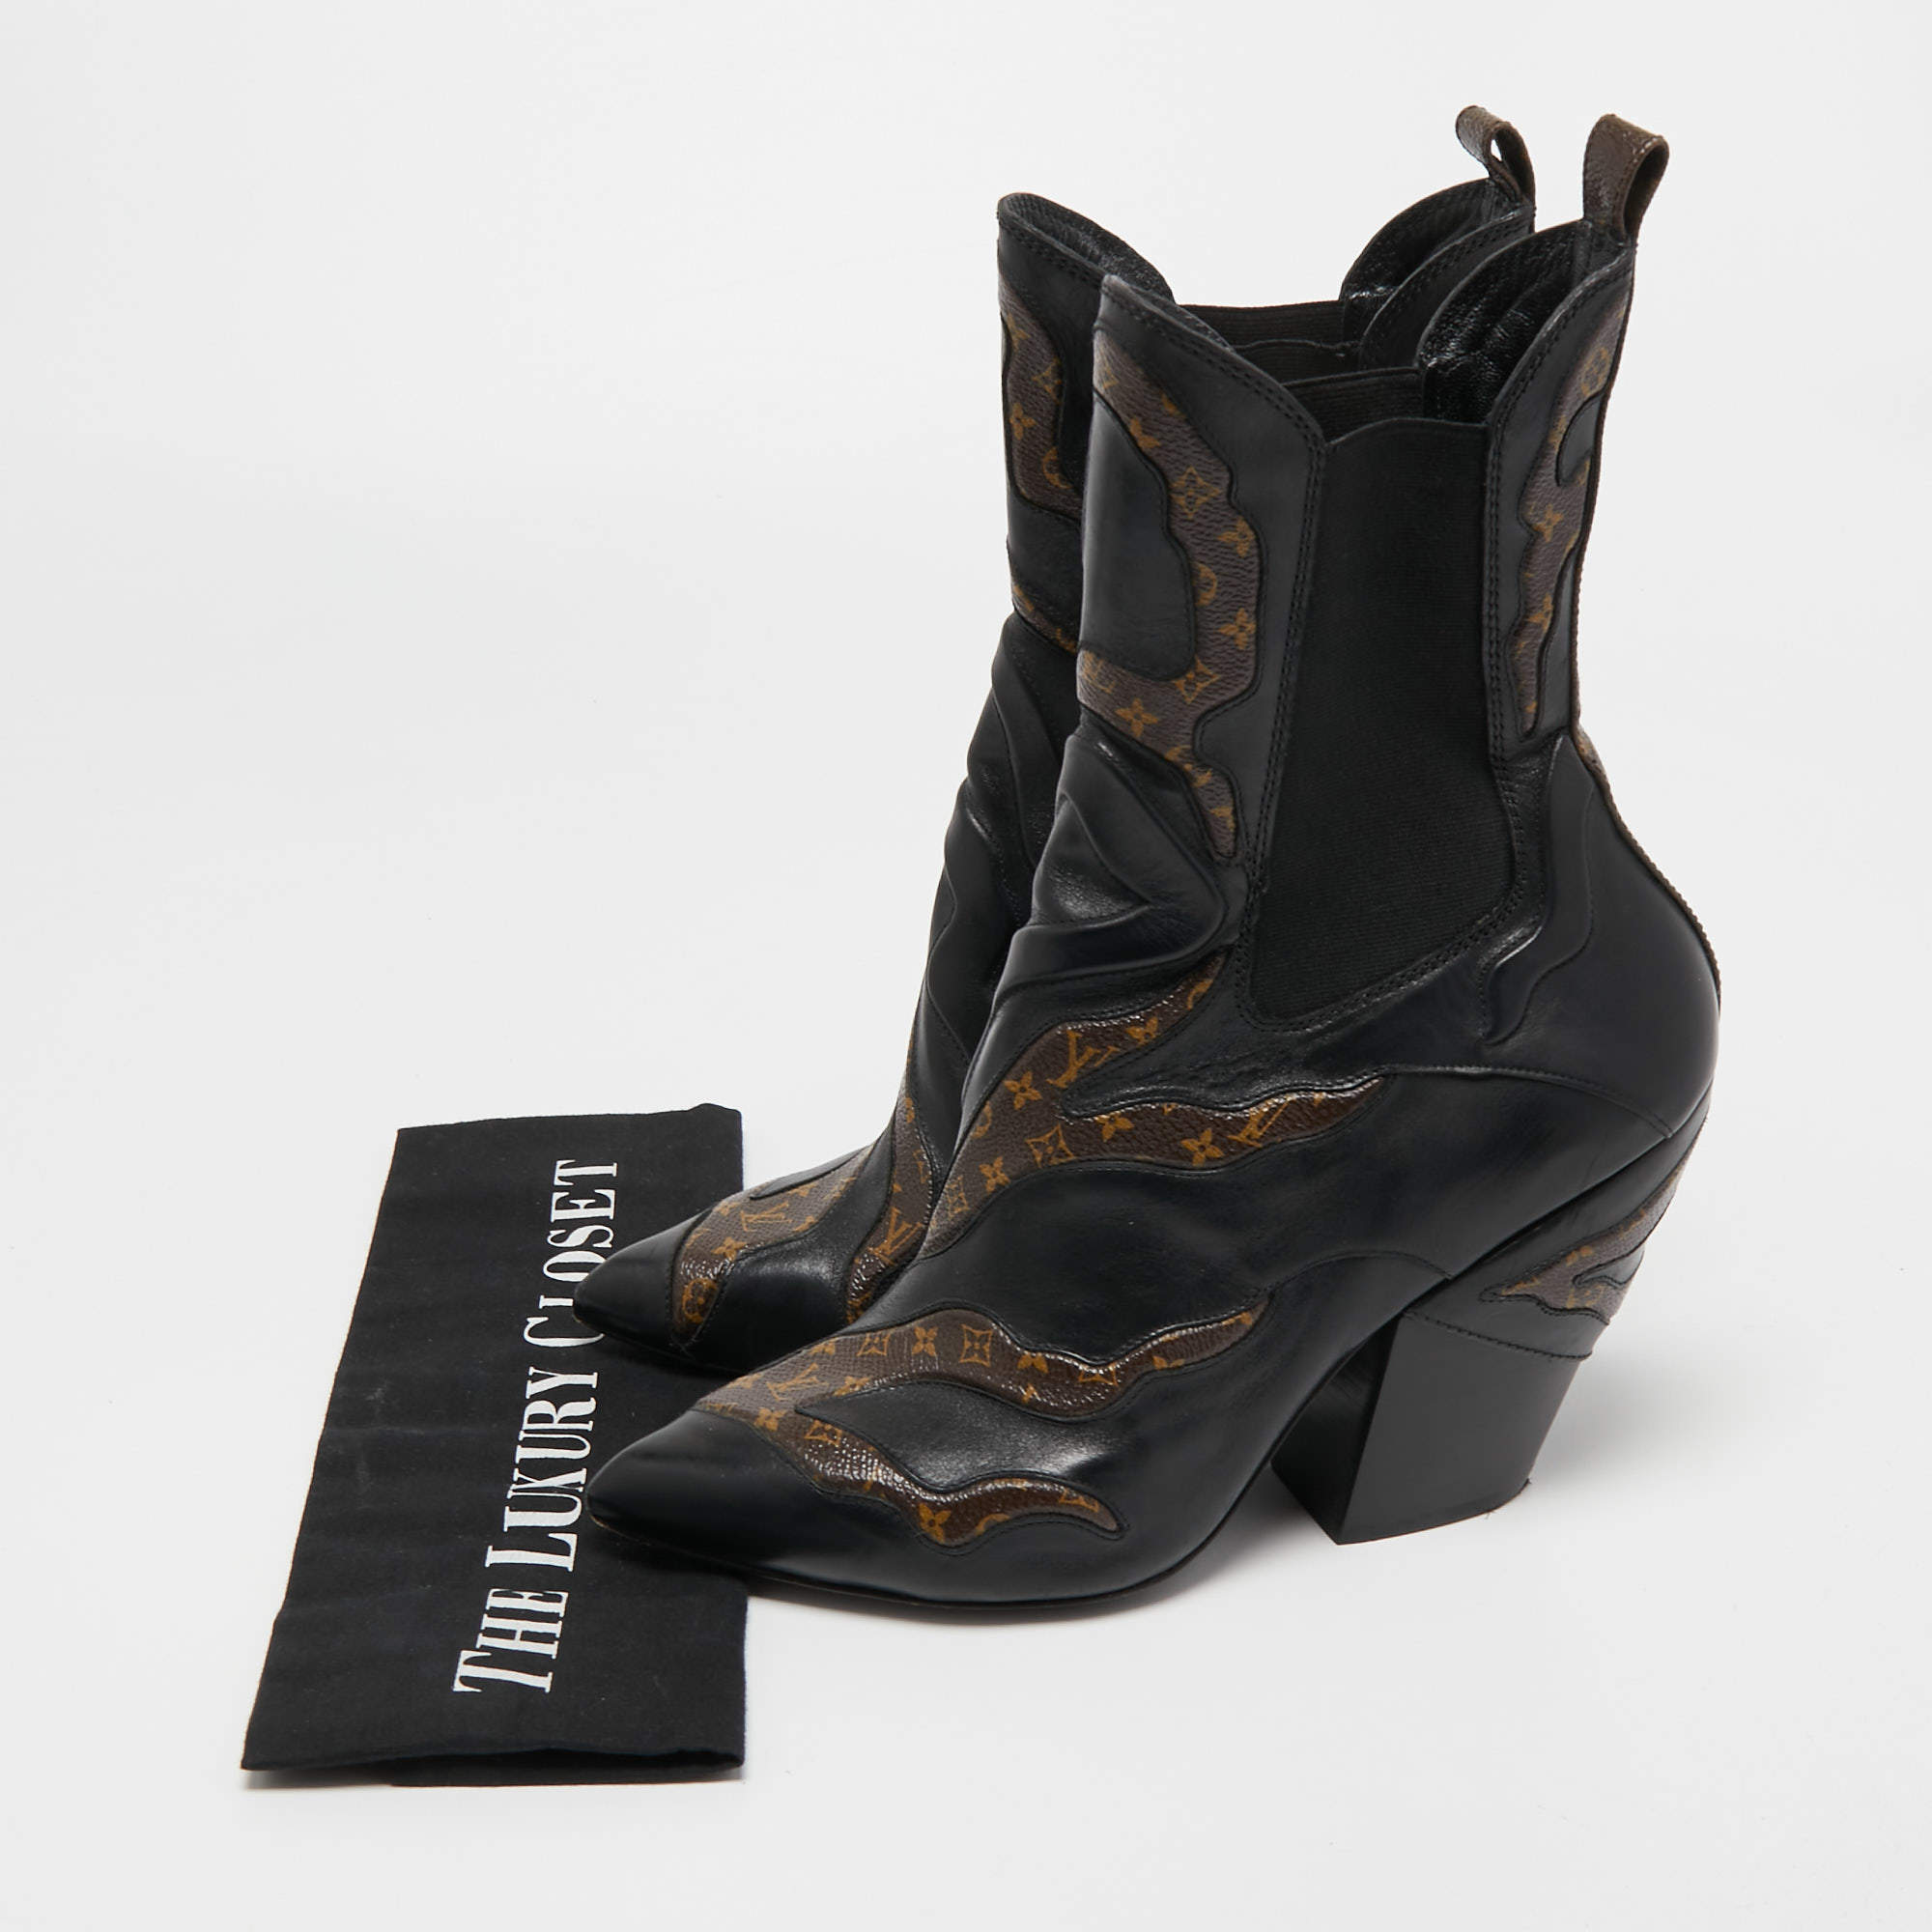 Louis Vuitton Fireball Leather Ankle Boots - Current Season 38.5